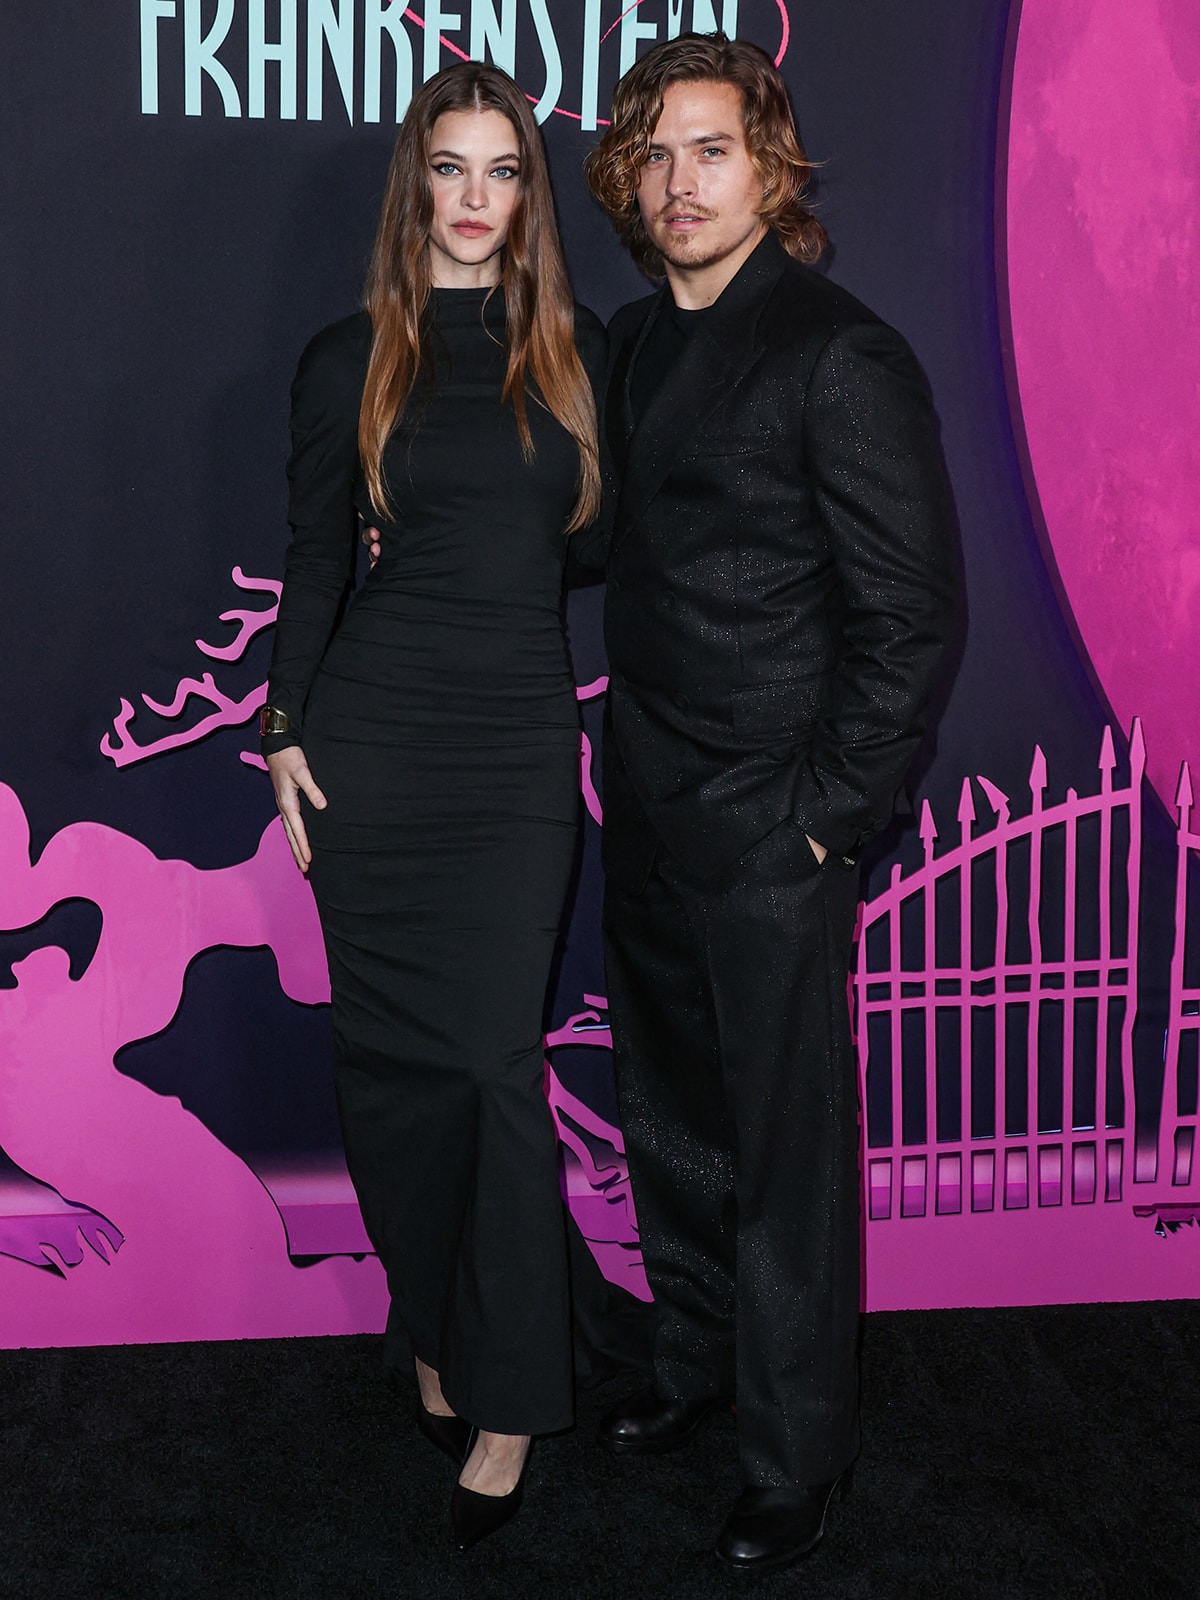 Barbara Palvin and Dylan Sprouse wear matching black ensembles, with Barbara in a Maison Alaia dress and Dylan in a shimmering black suit, at the Los Angeles premiere of Lisa Frankenstein to support Cole Sprouse